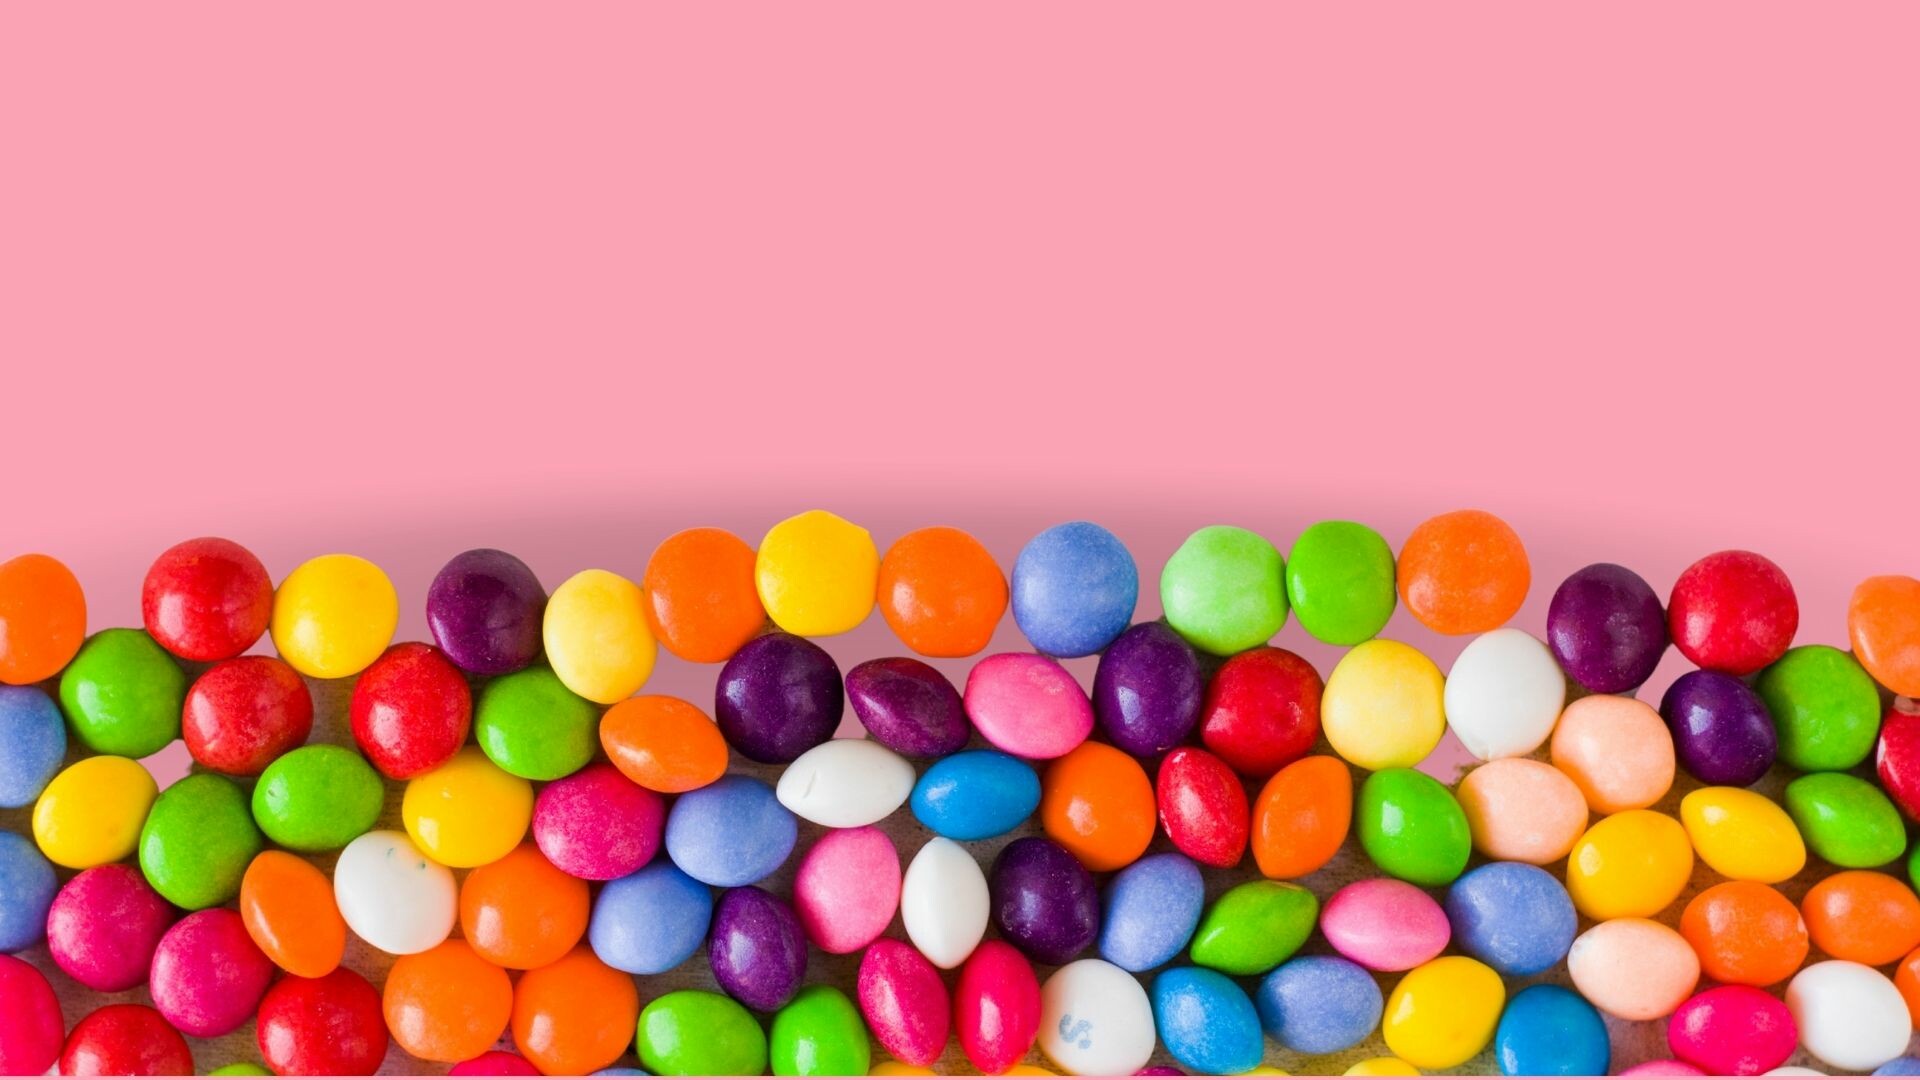 Skittles on a pink background.